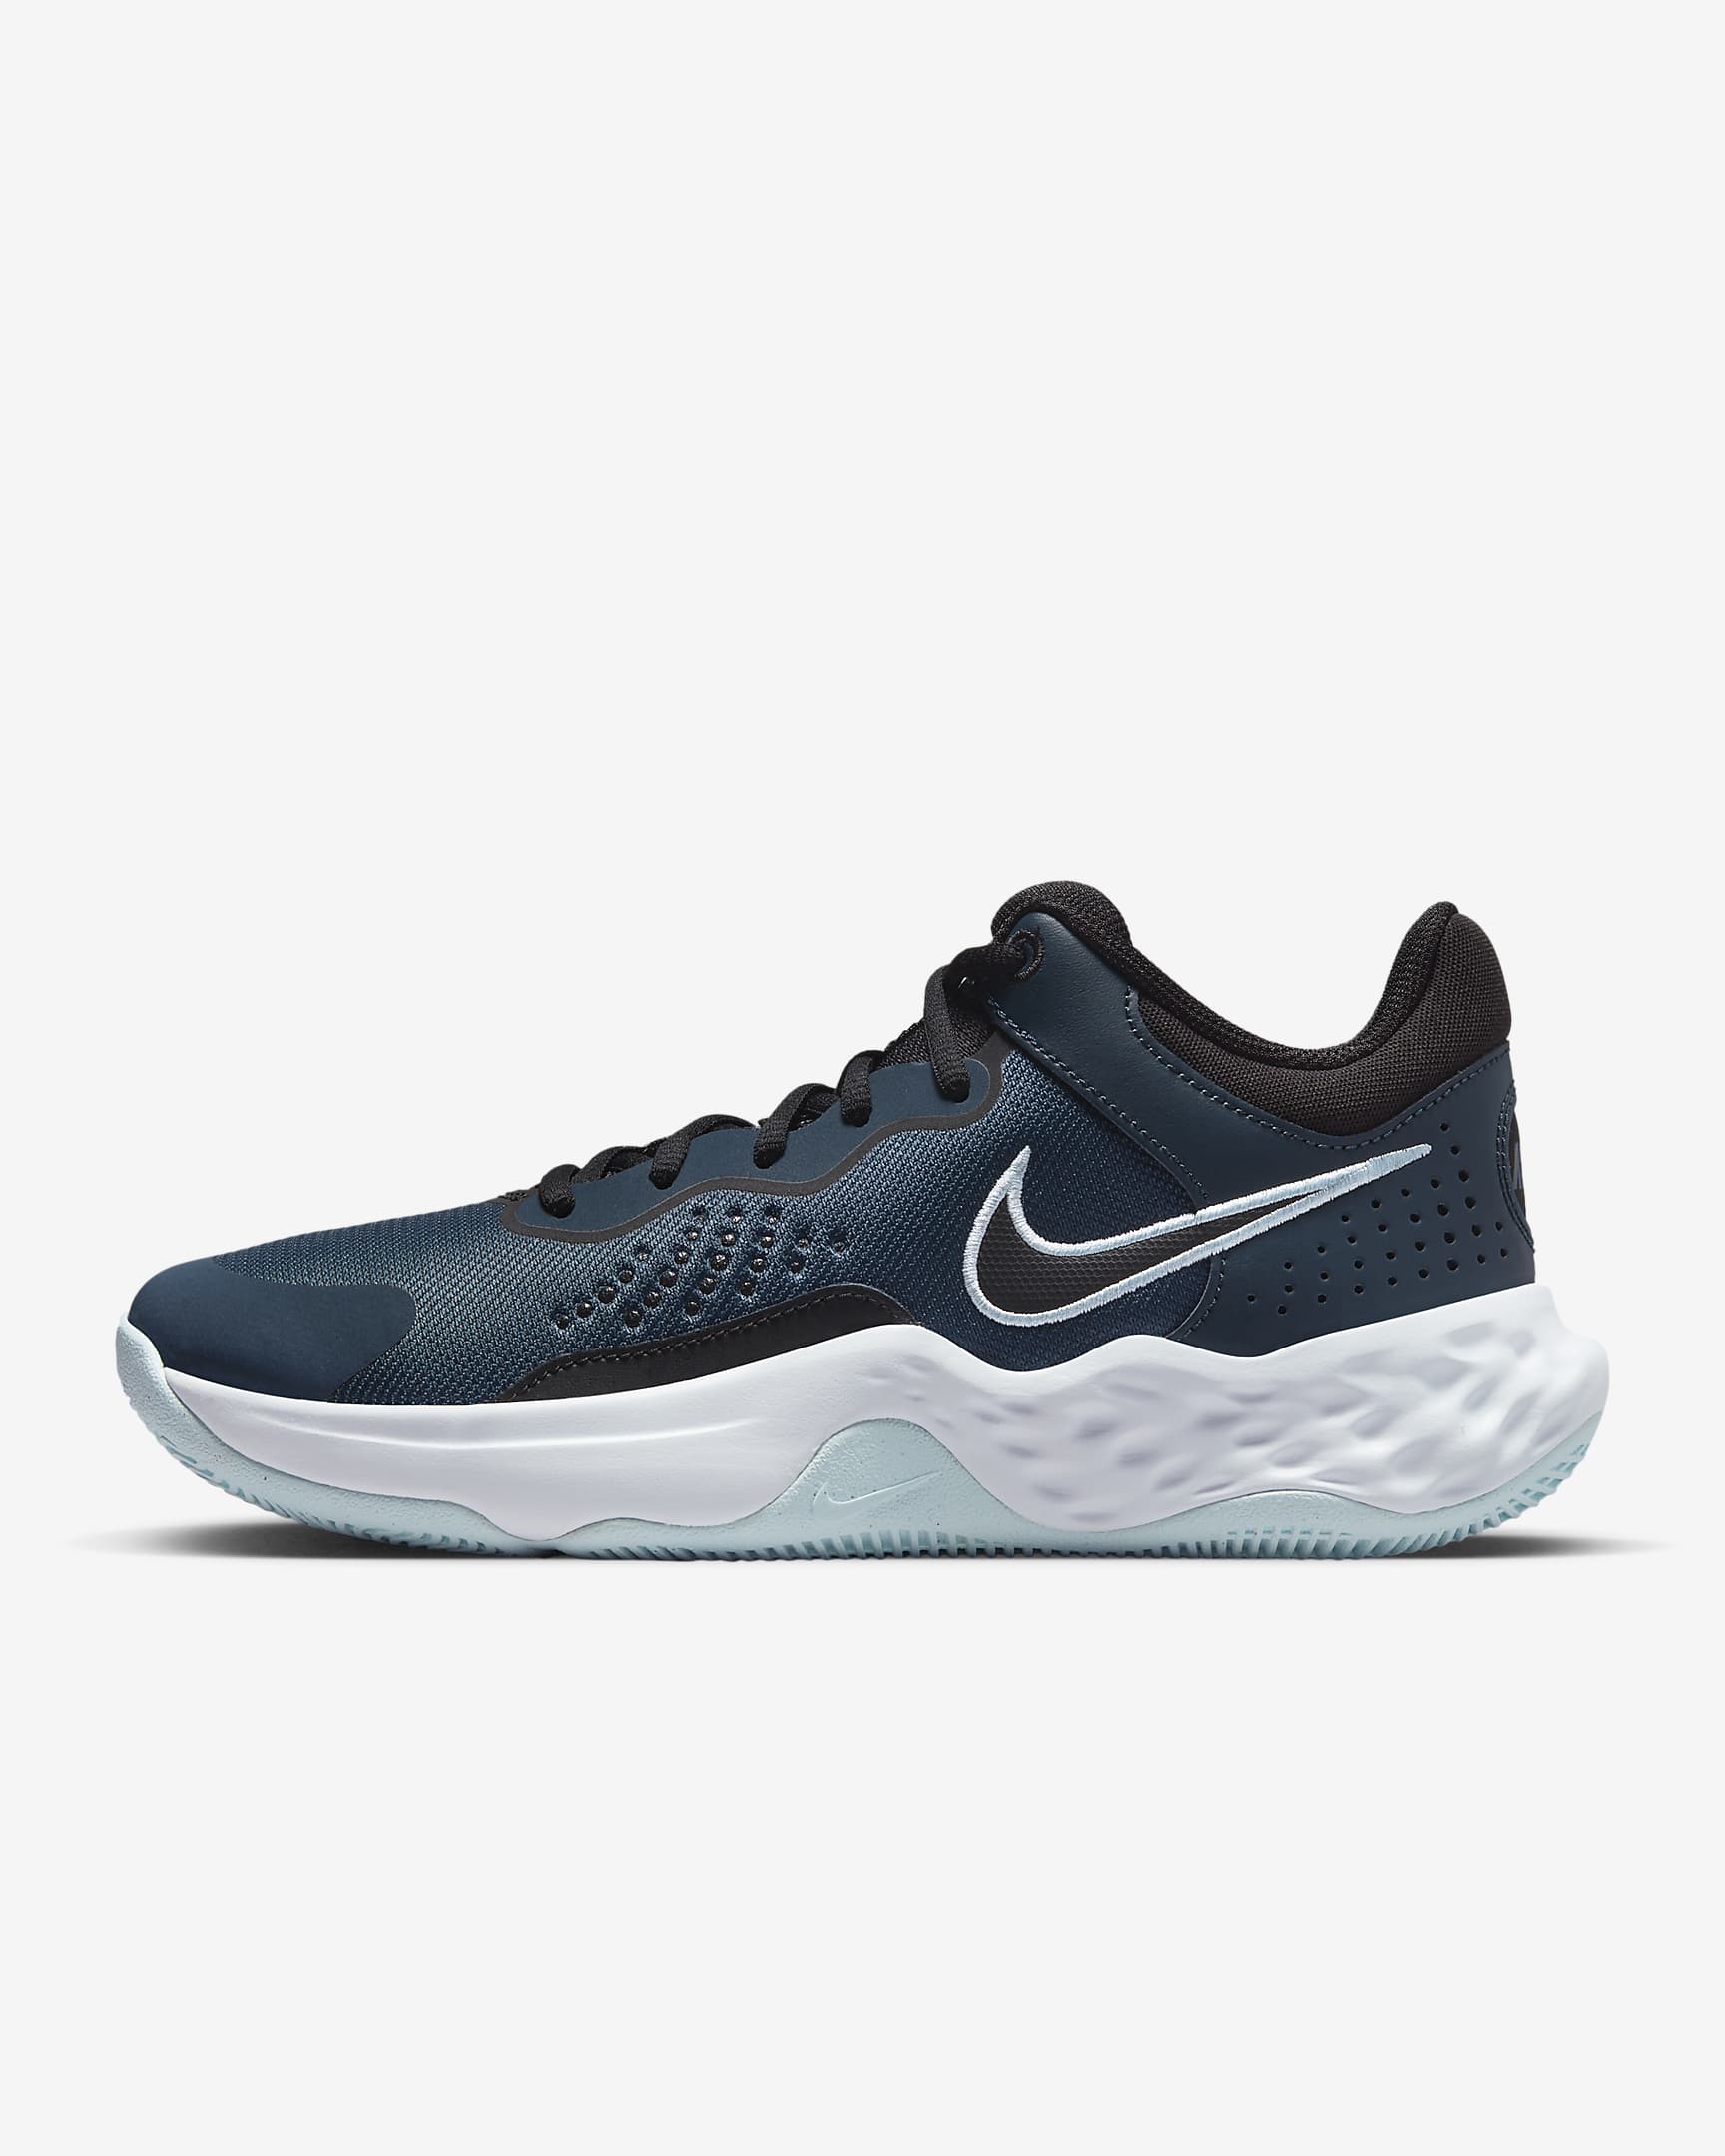 Nike Fly.By Mid 3 Basketball Shoes - Armoury Navy/Glacier Blue/White/Black